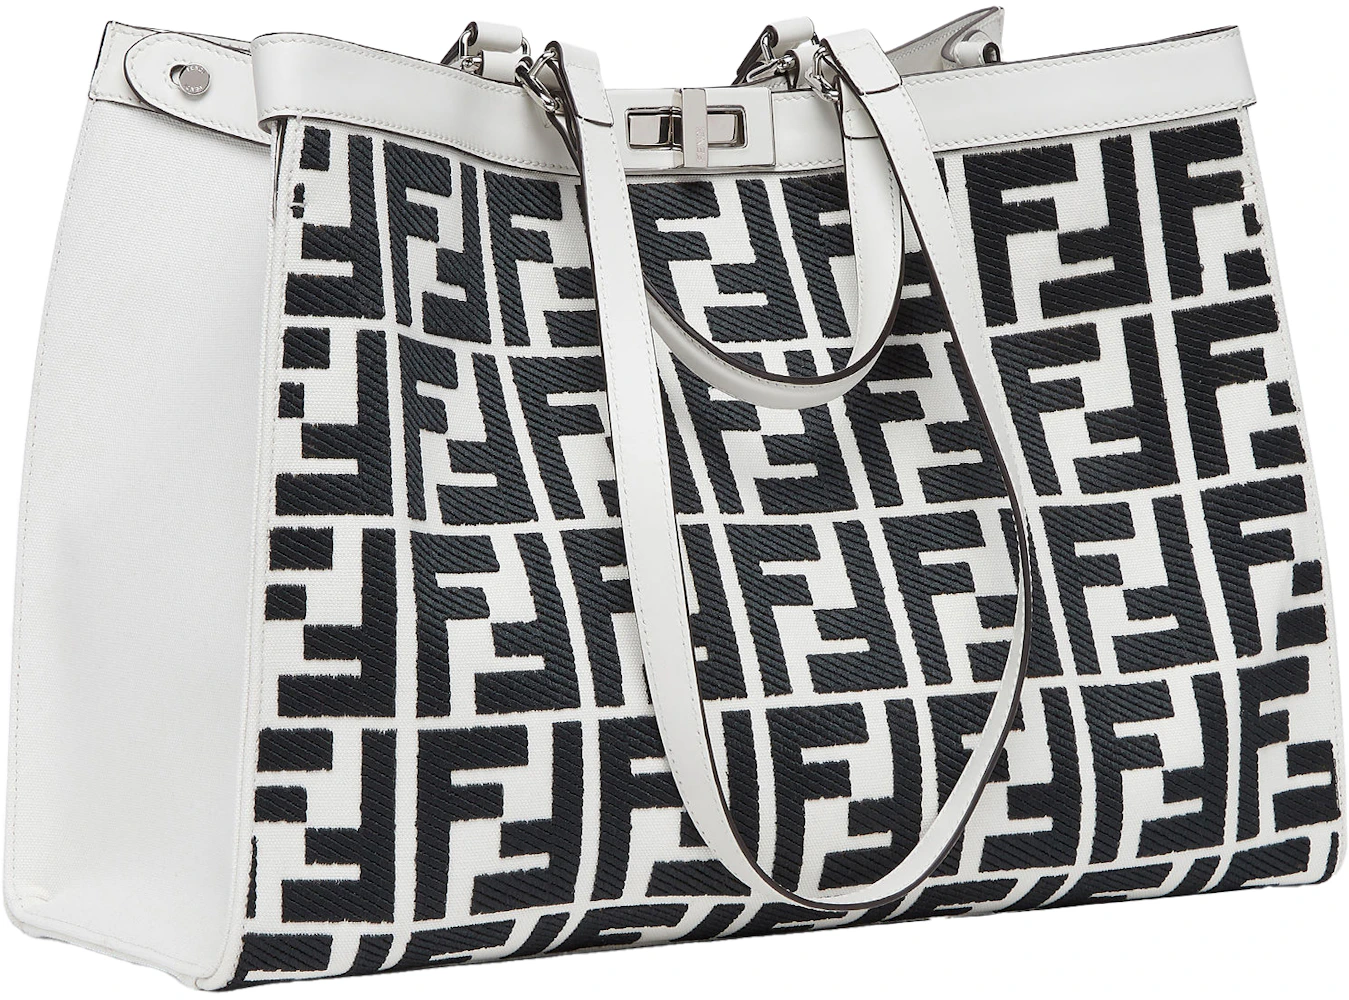 Fendi by Marc Jacobs Baguette White and Black Canvas Bag with FF